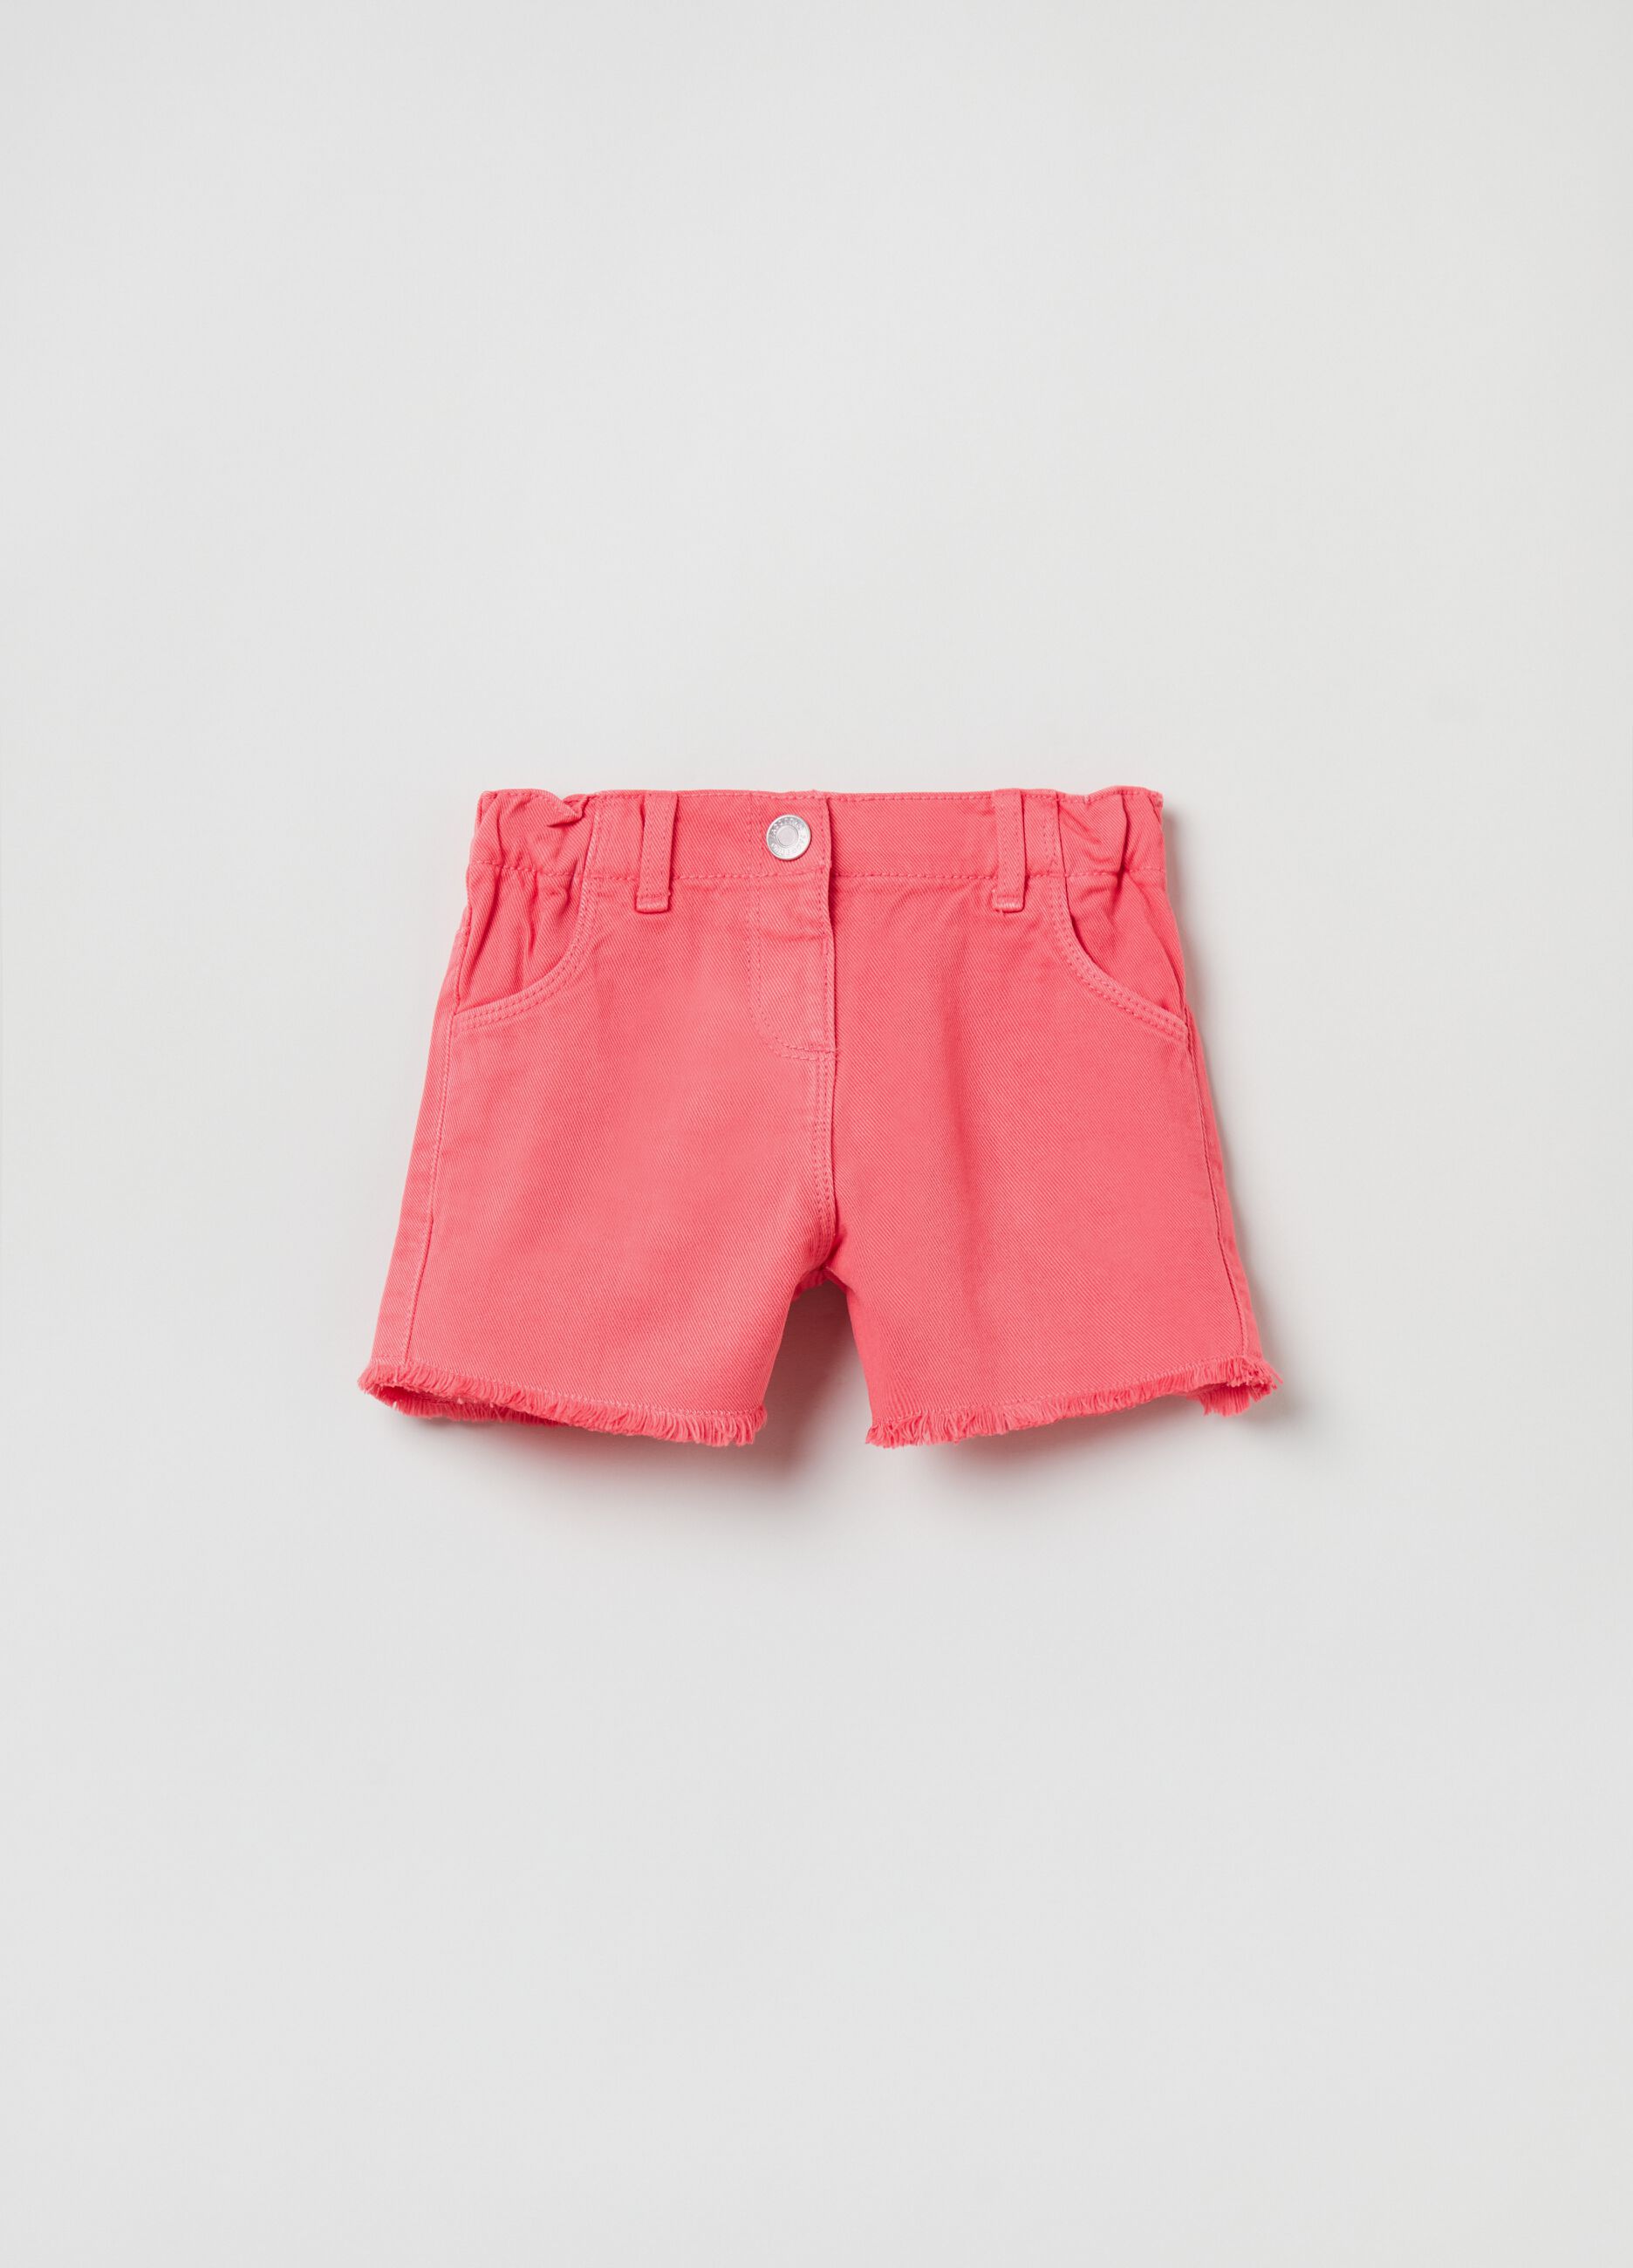 Shorts in cotton and Lyocell denim